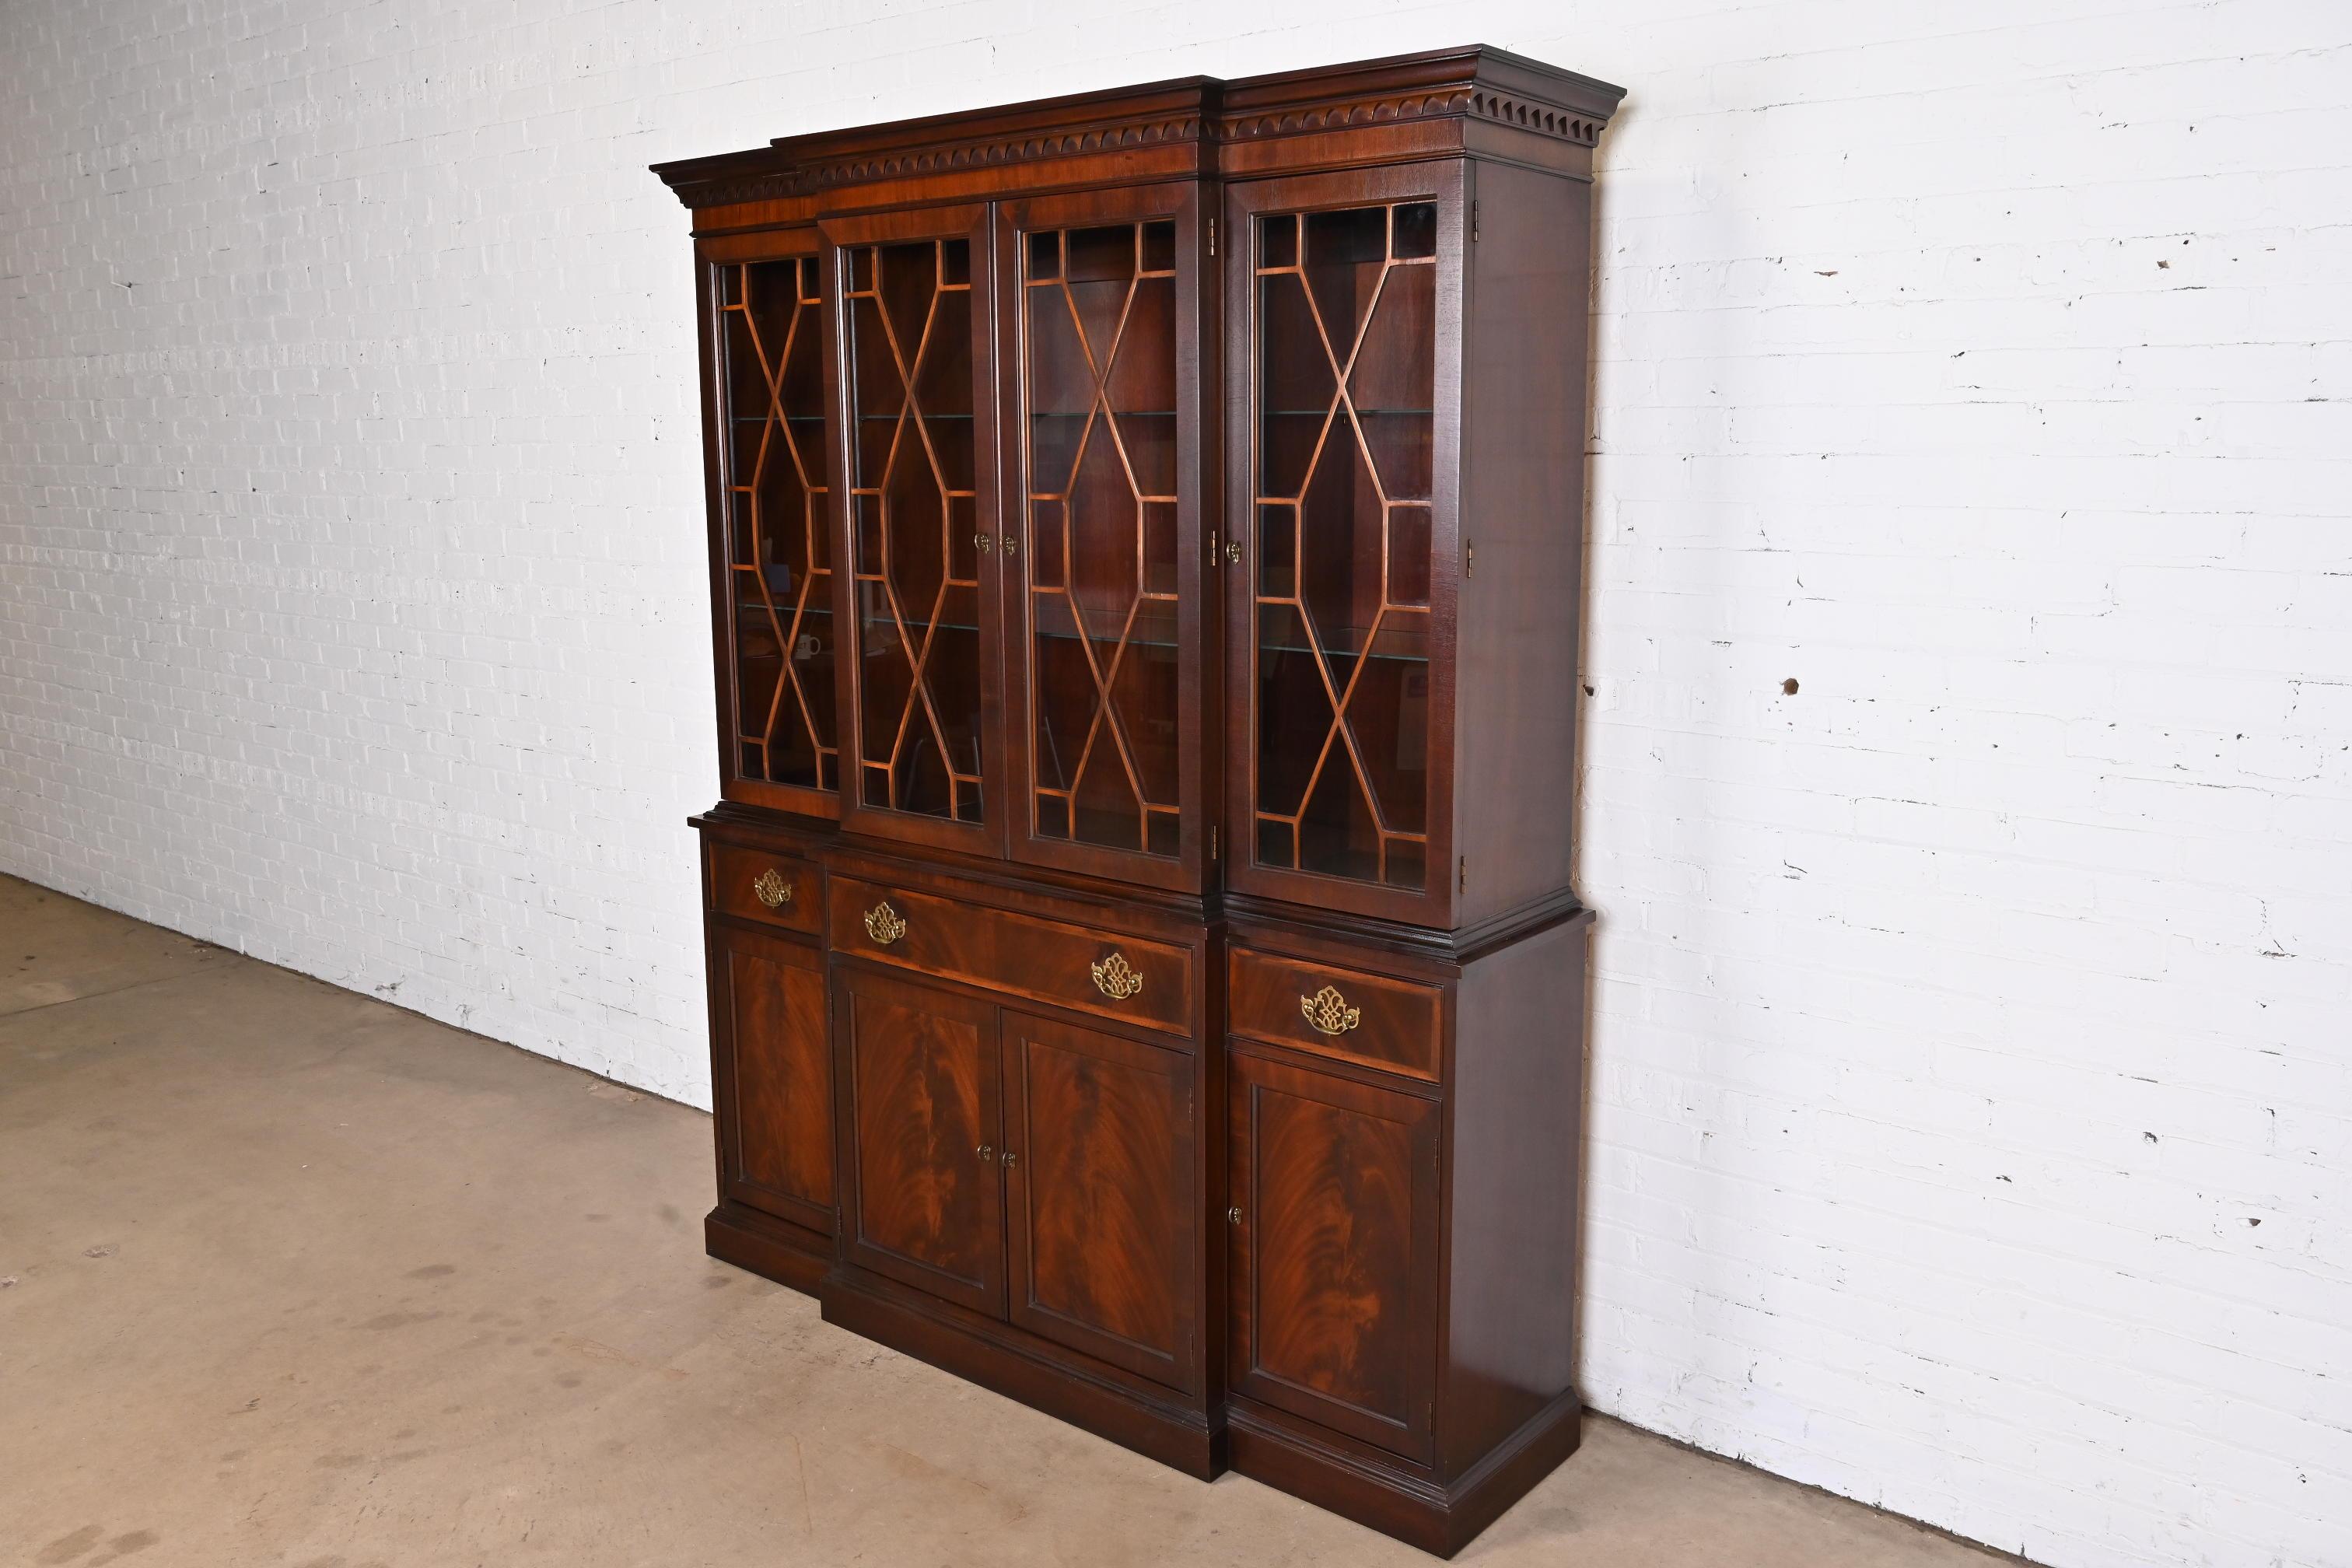 Georgian Carved Mahogany Lighted Breakfront Bookcase Cabinet by Hickory In Good Condition For Sale In South Bend, IN